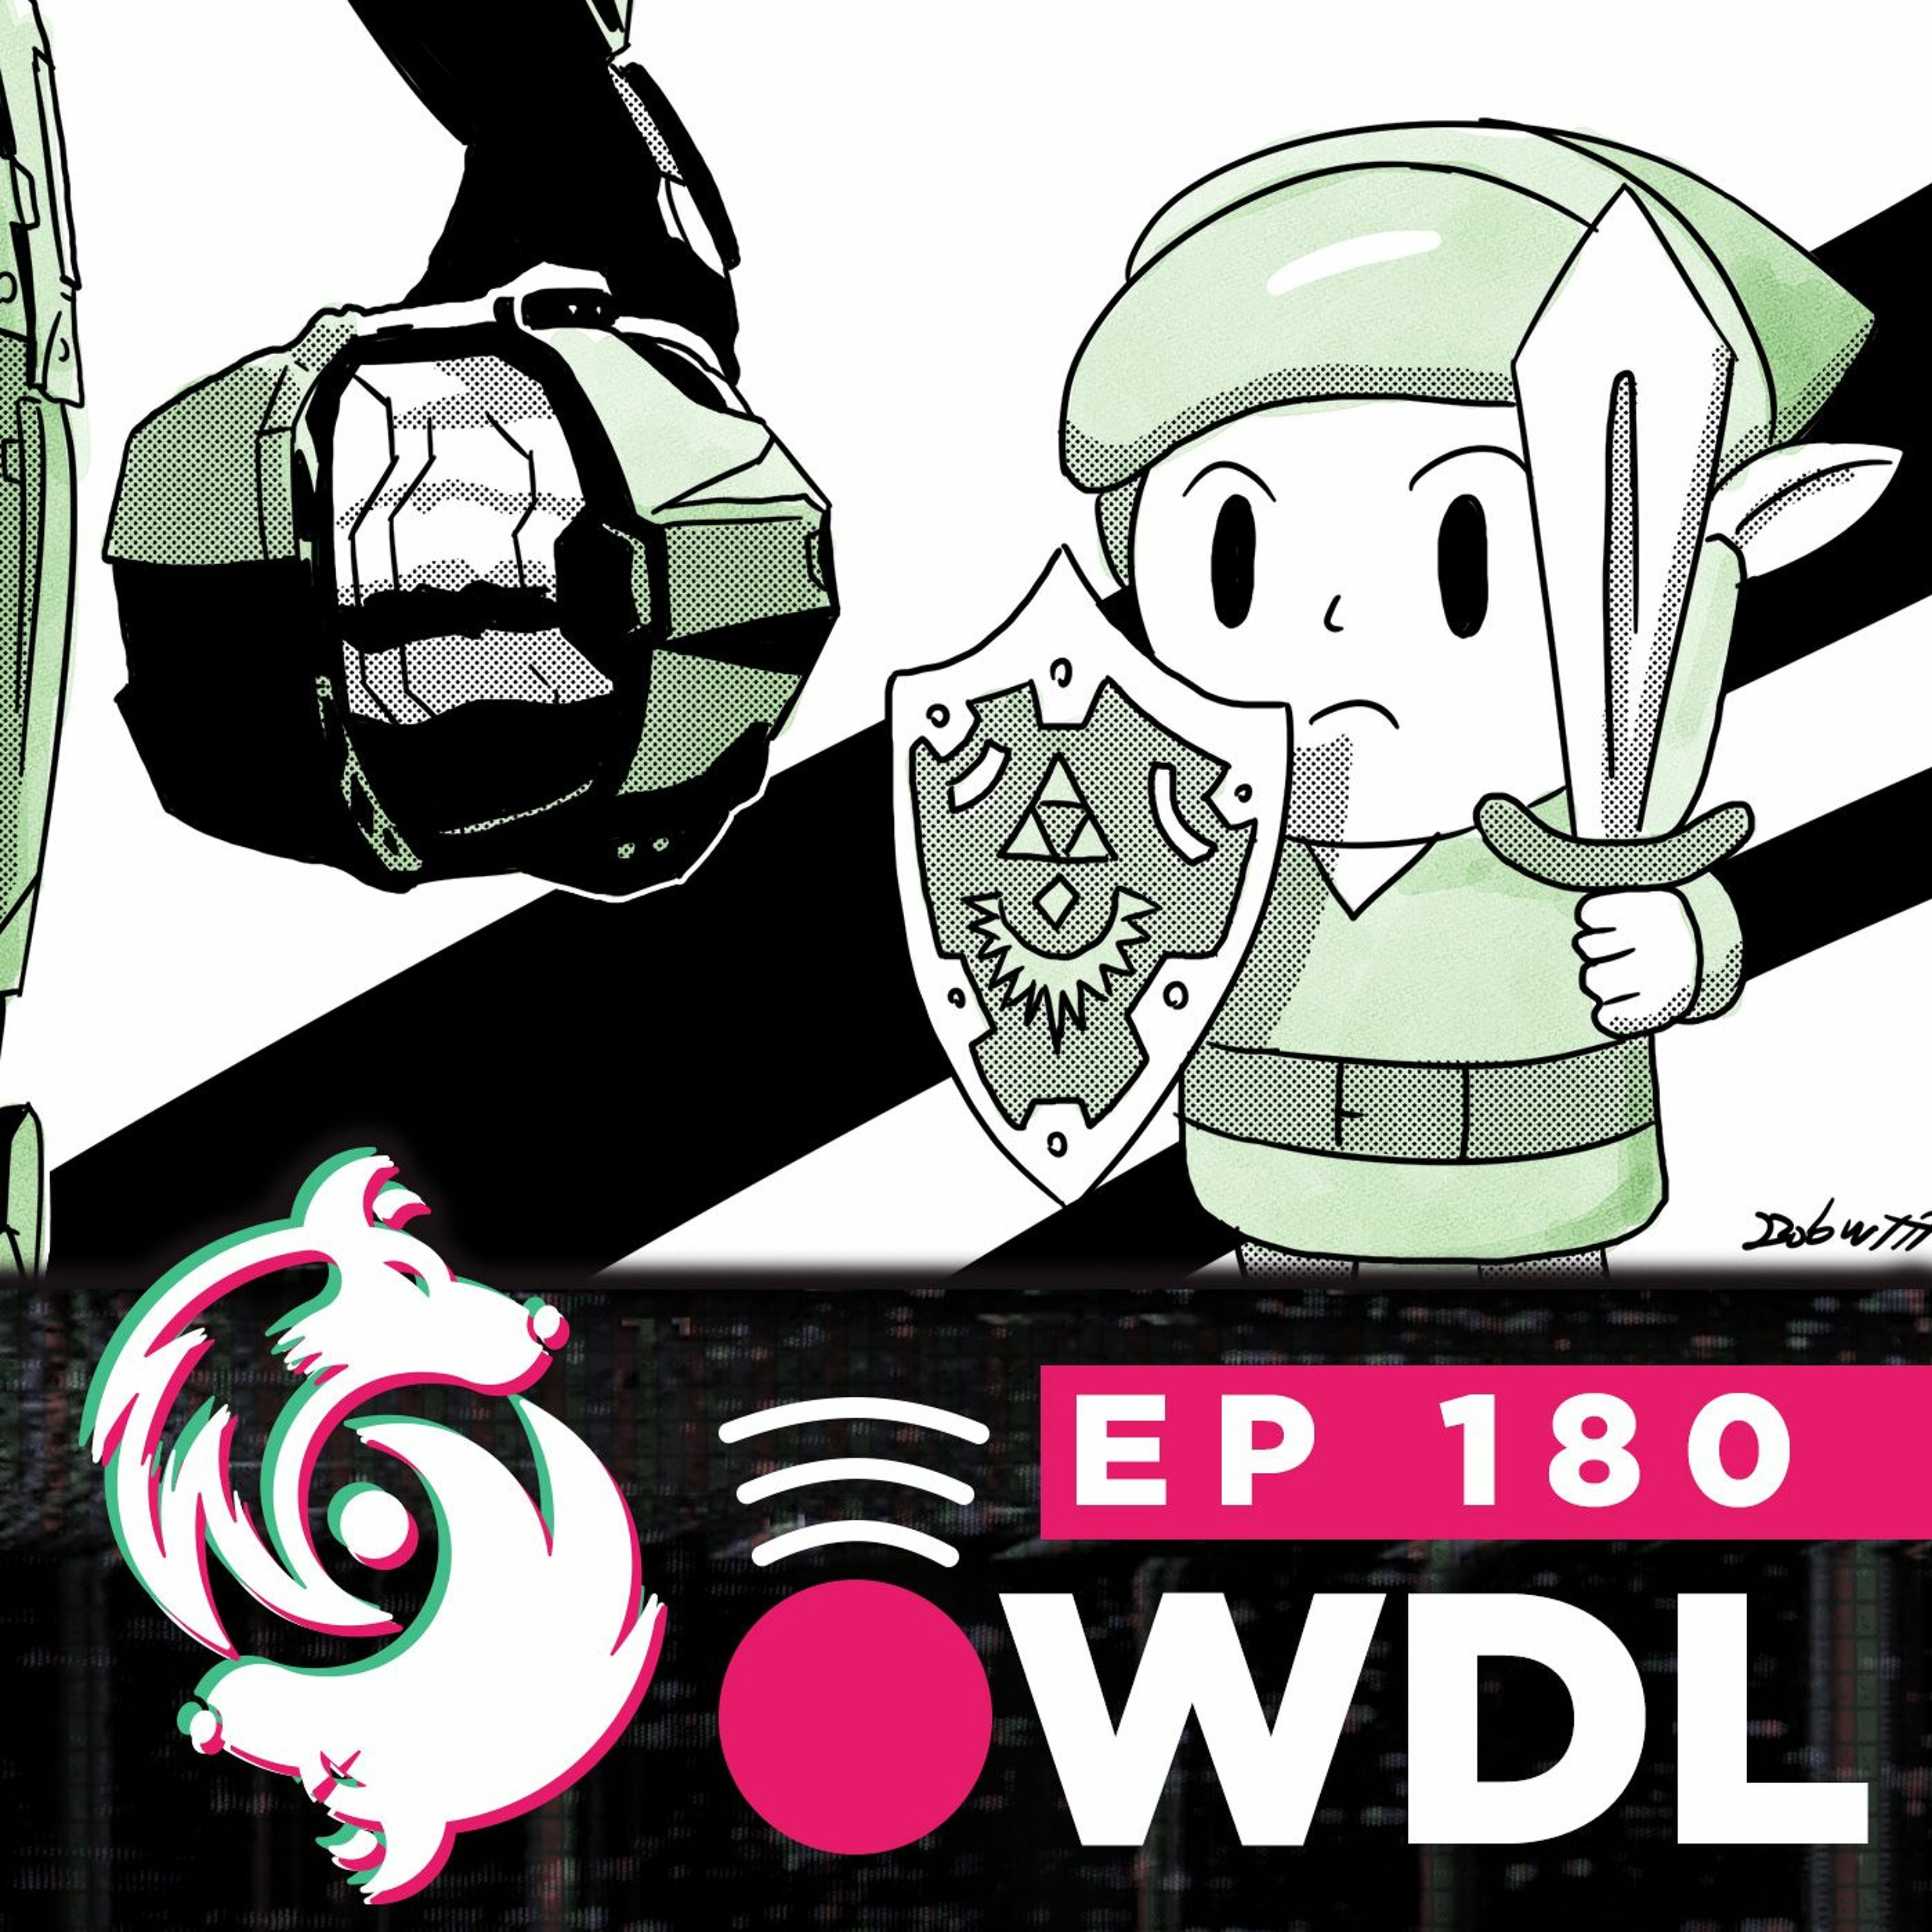 Rounding up ALL of the news and hands on impressions from E3 2019 - WDL Ep 180